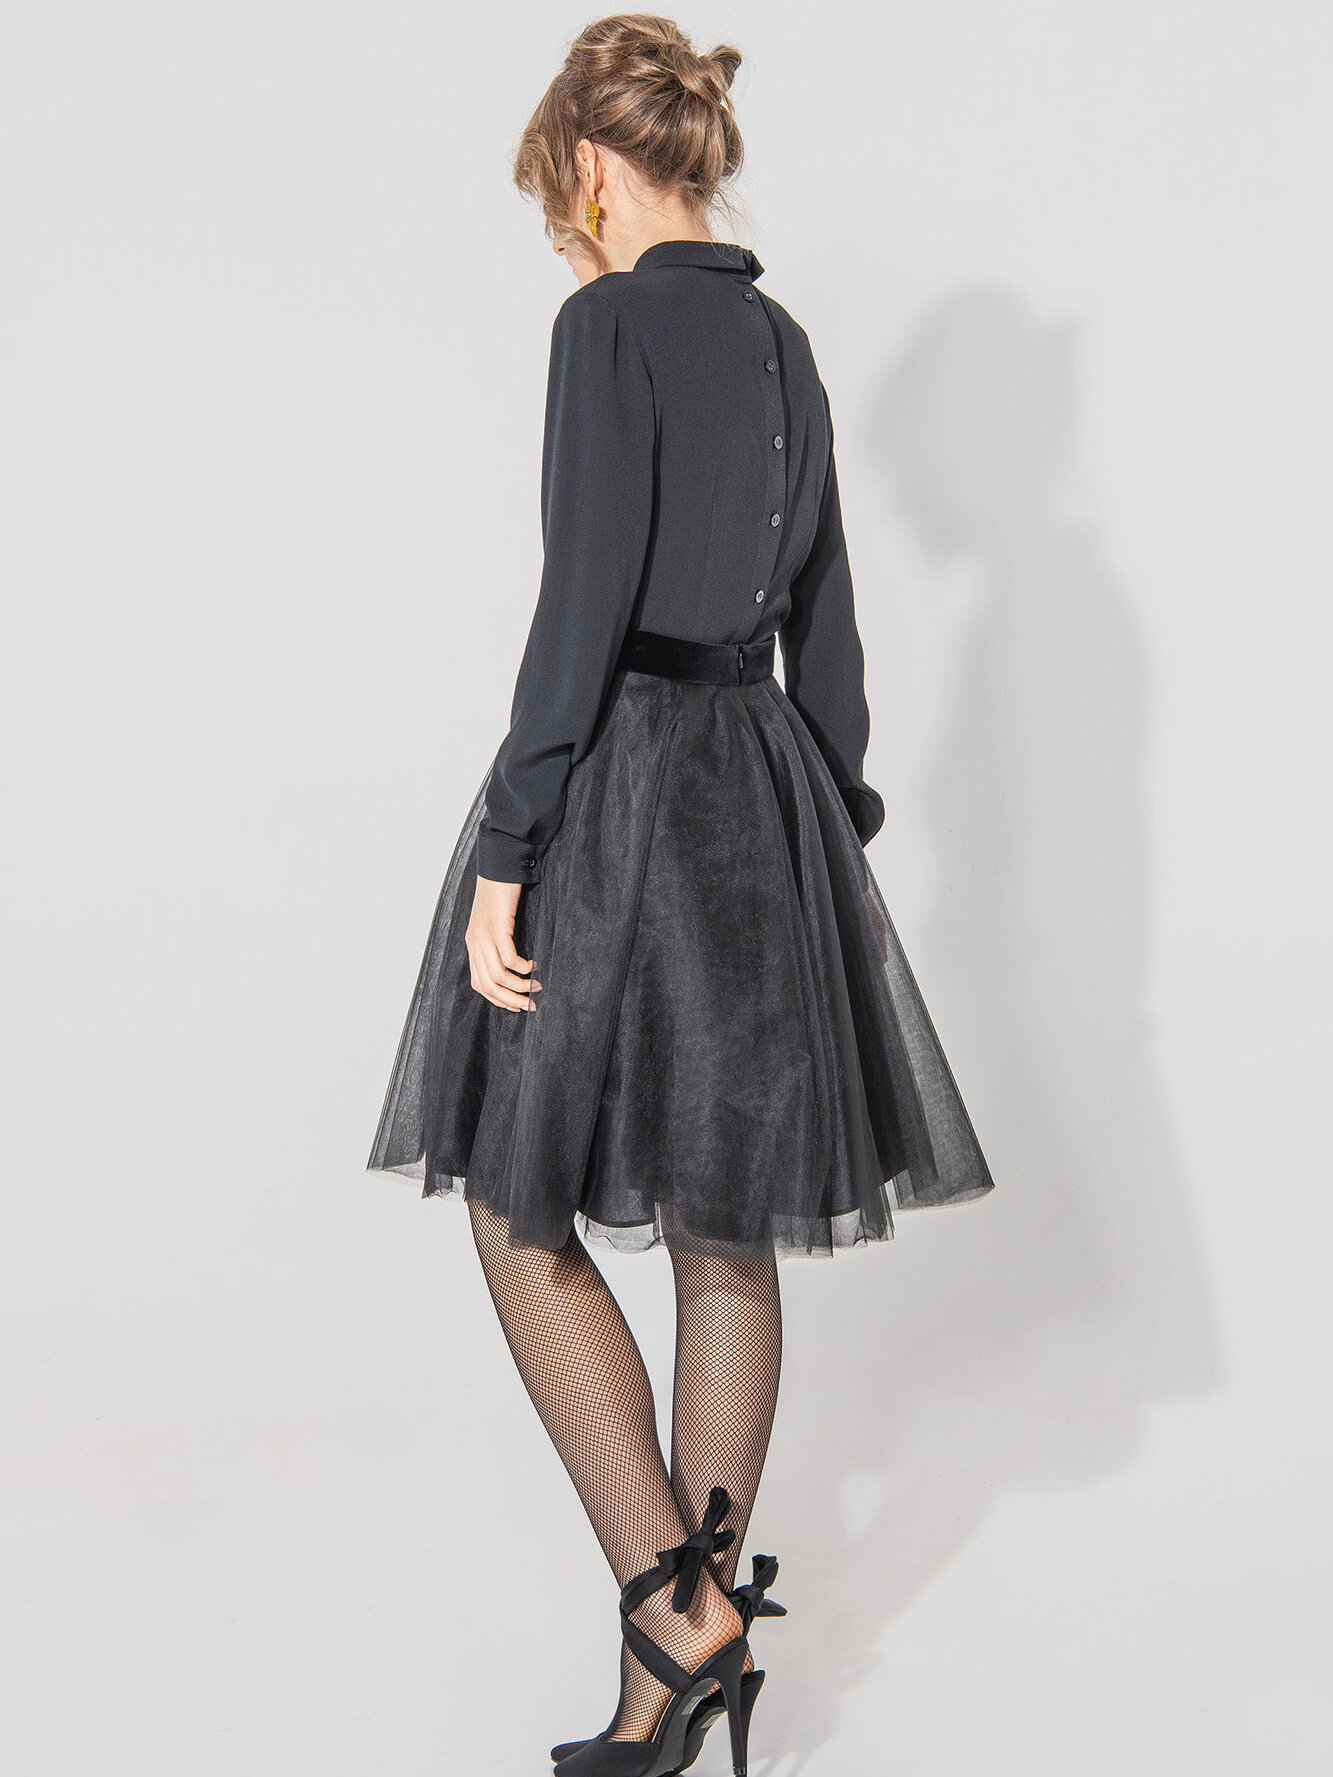 tulle skirt with a bow on the belt in black side uai • Sassa Björg